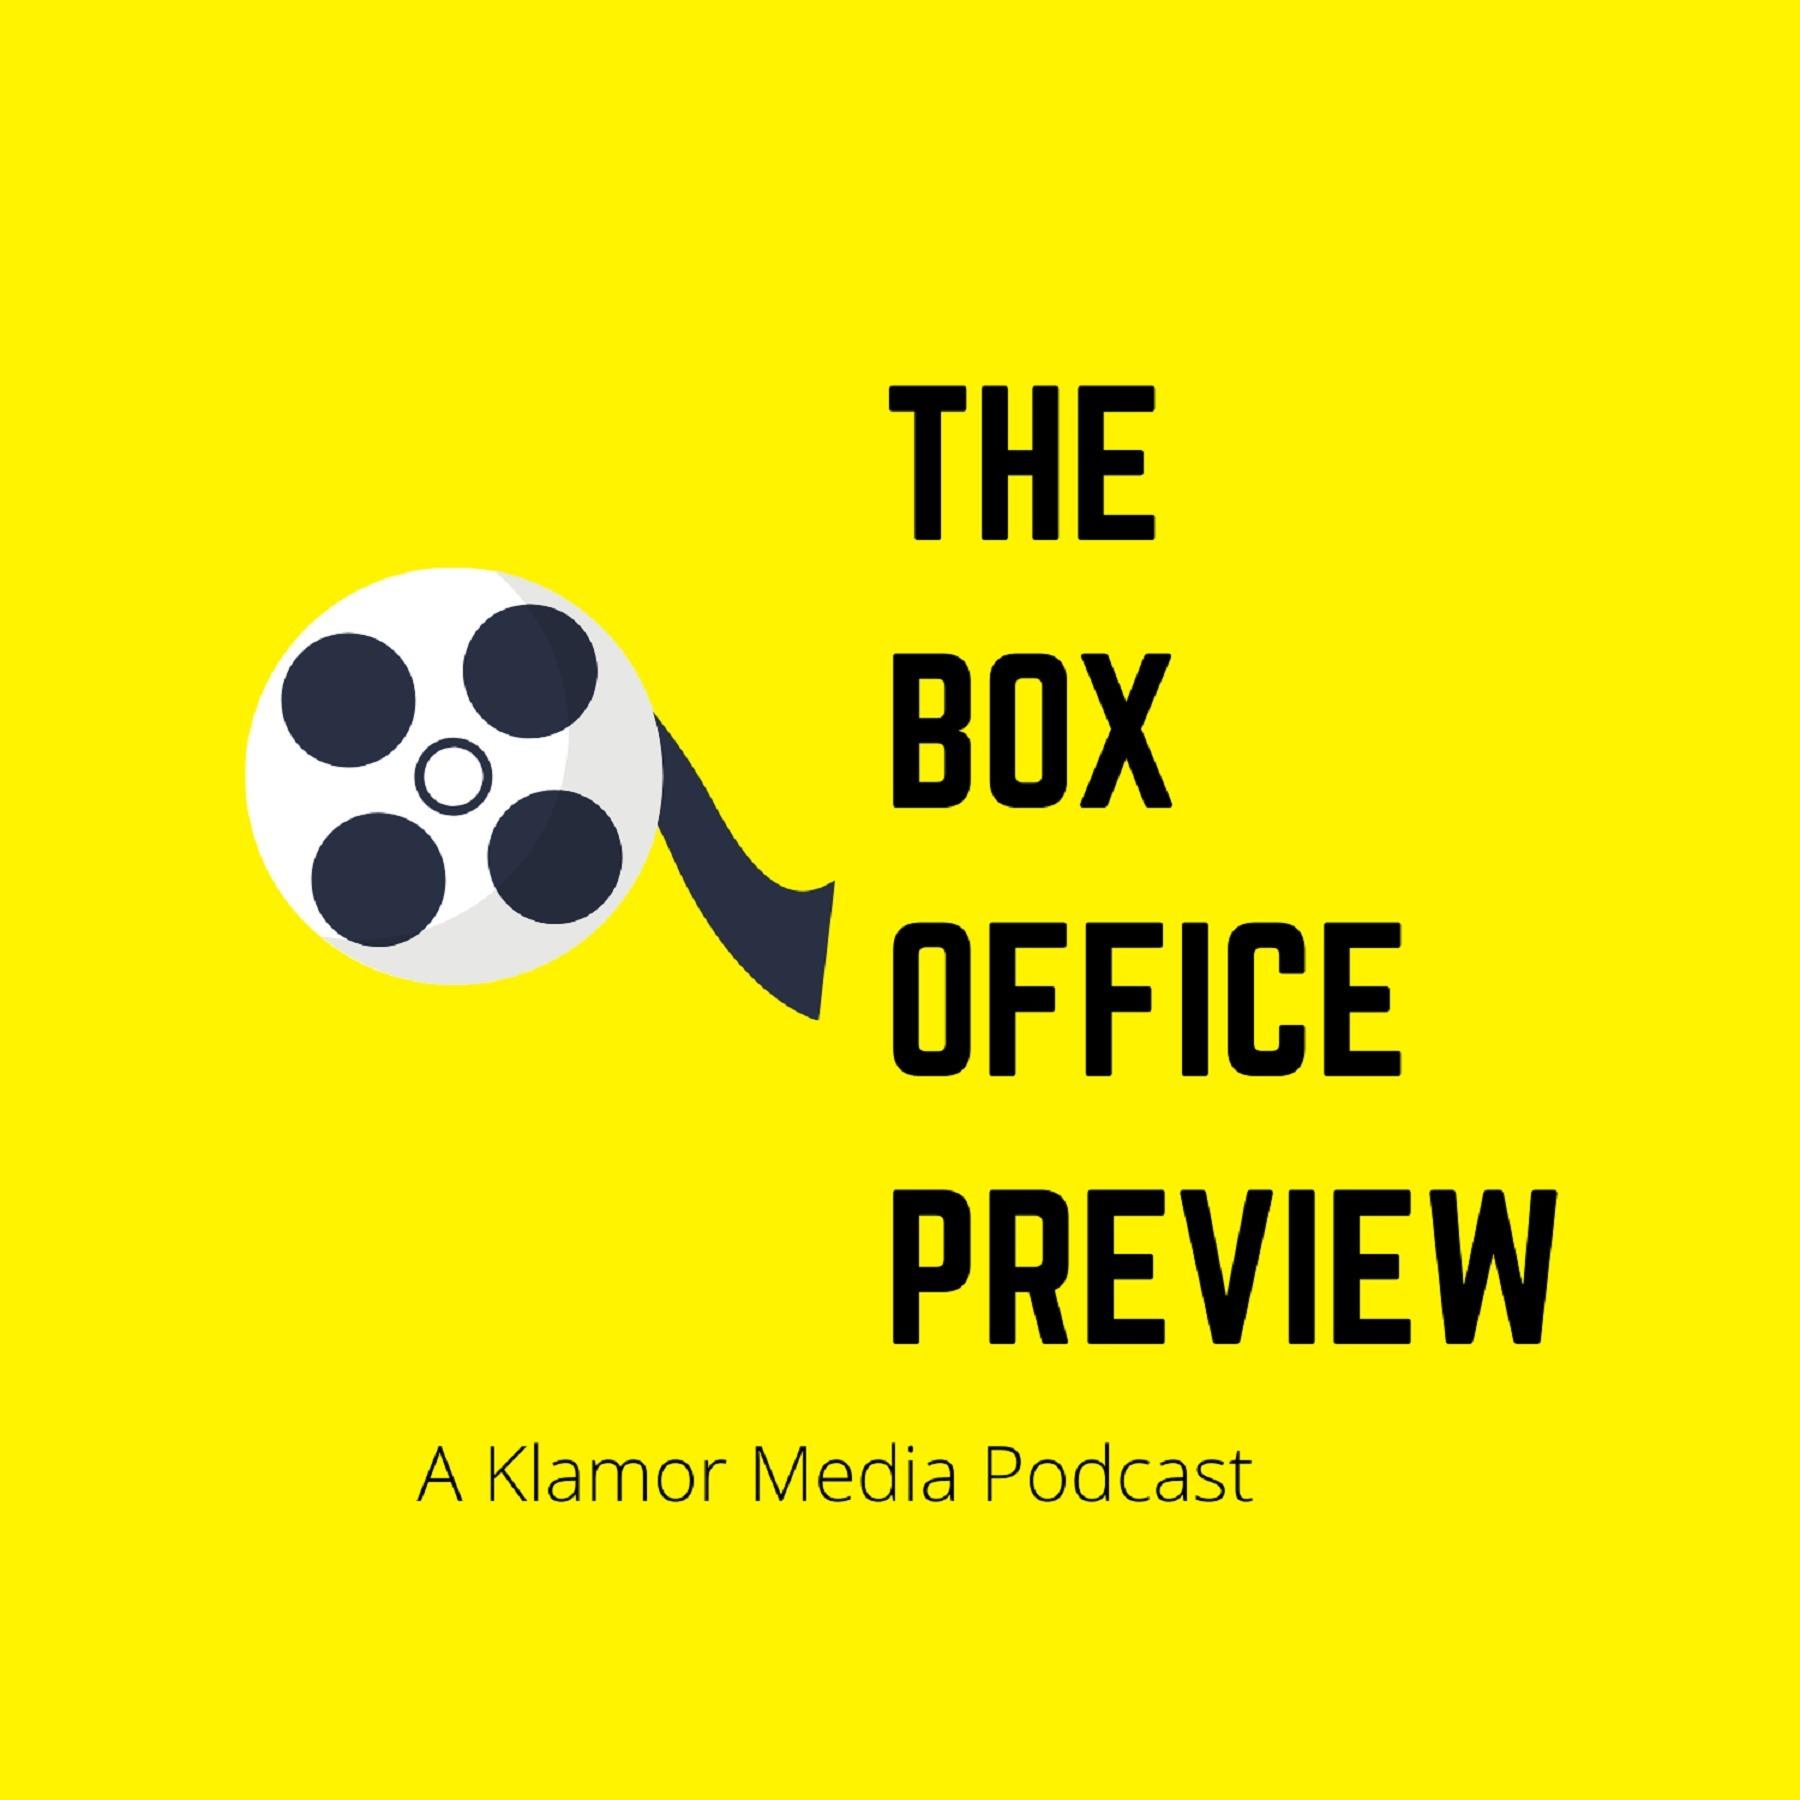 The Box Office Preview